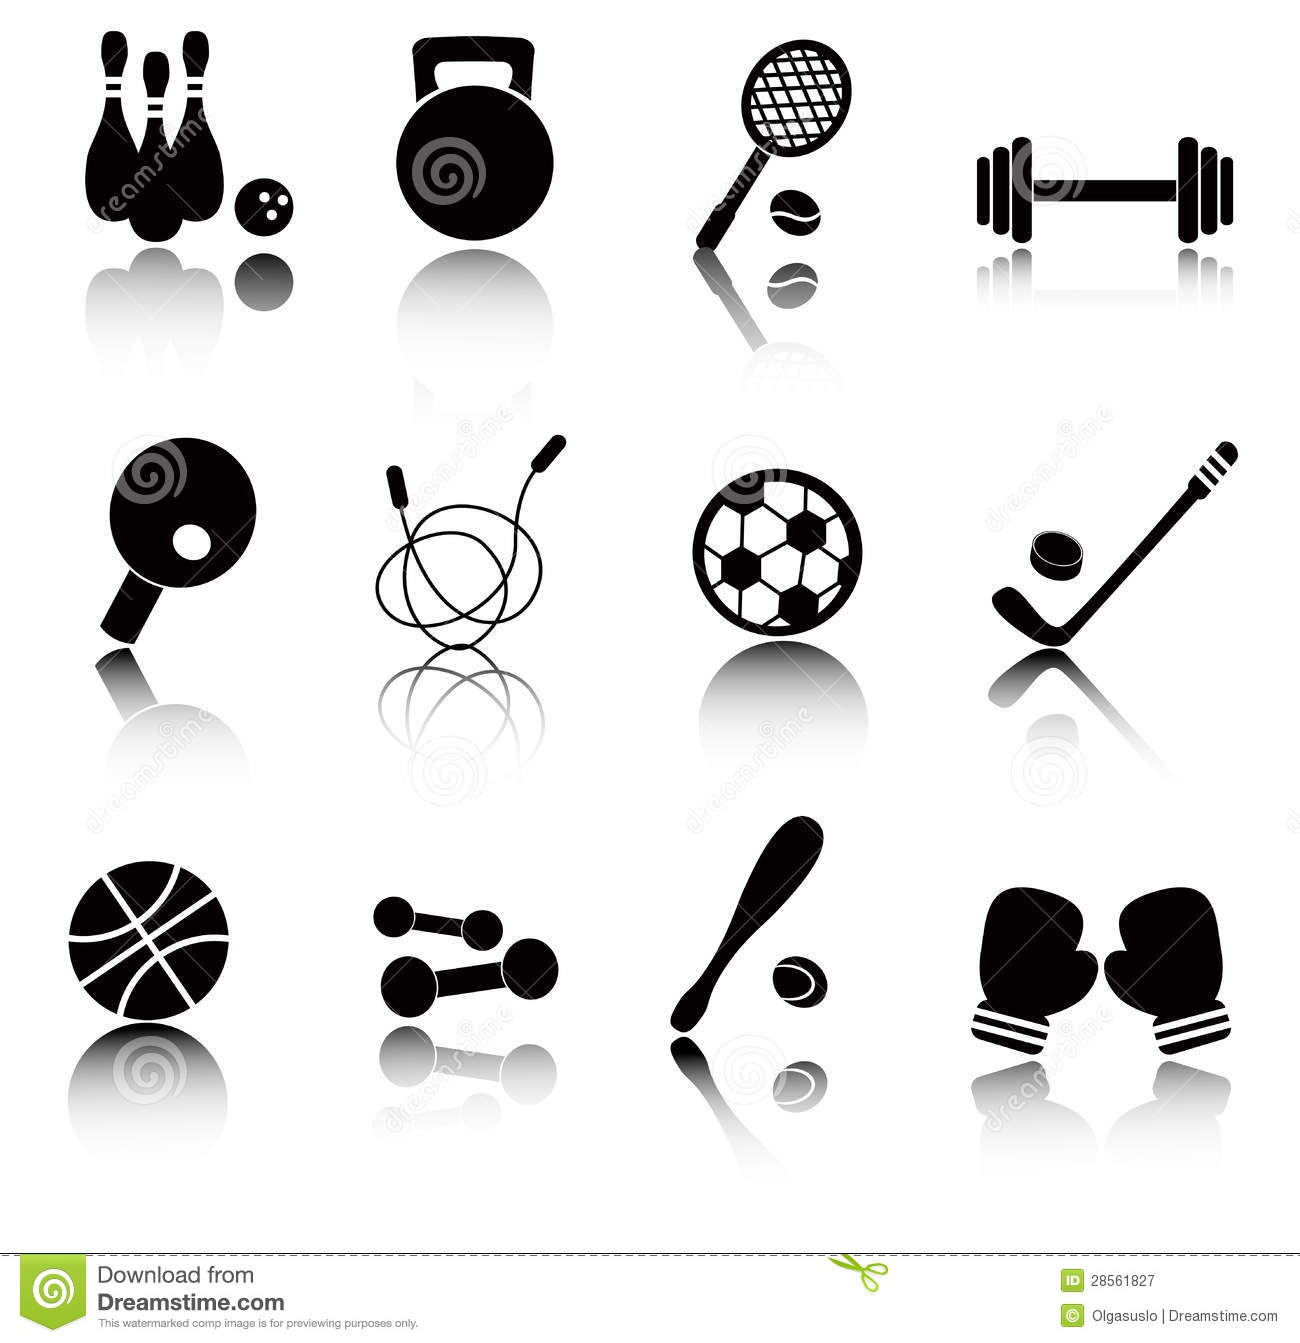 Free Sports Icons Black and White